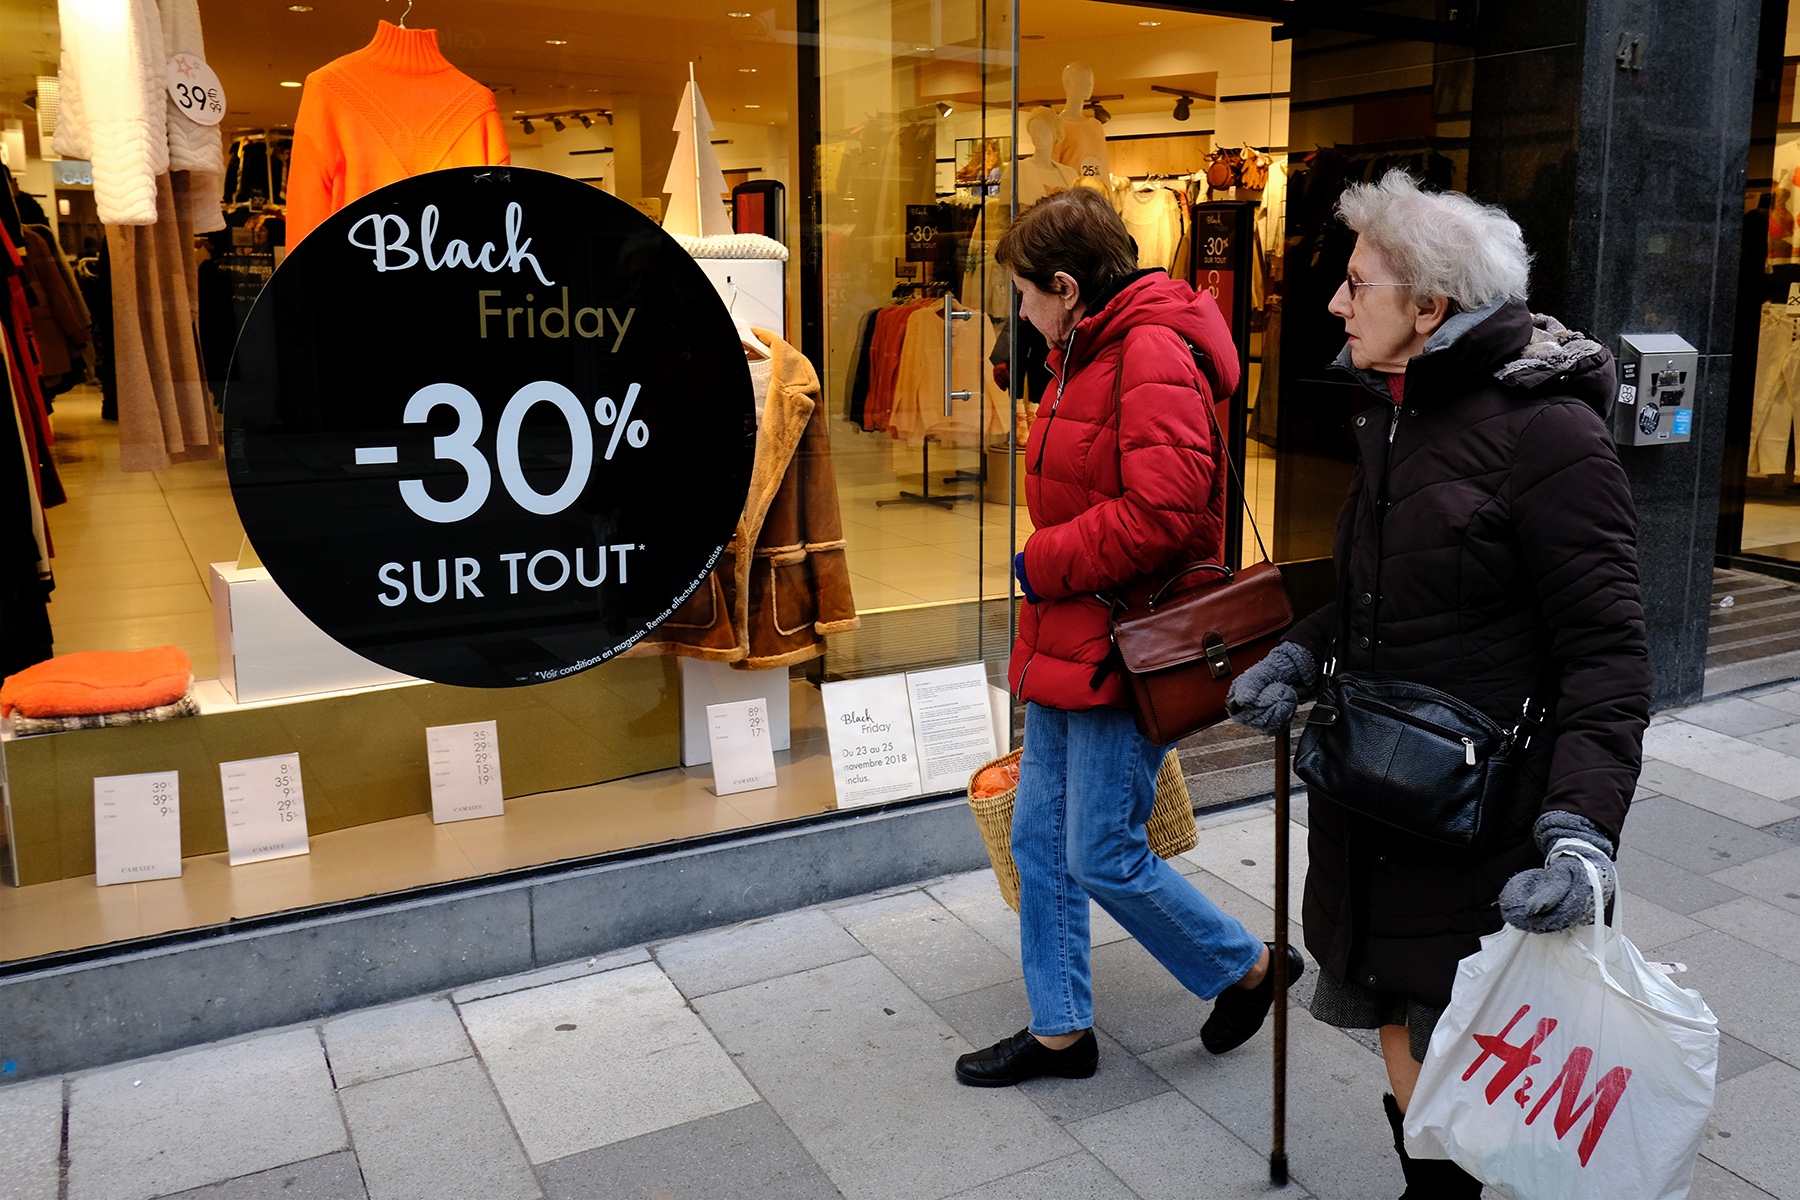 Sale prices at a shop in Brussels, Belgium